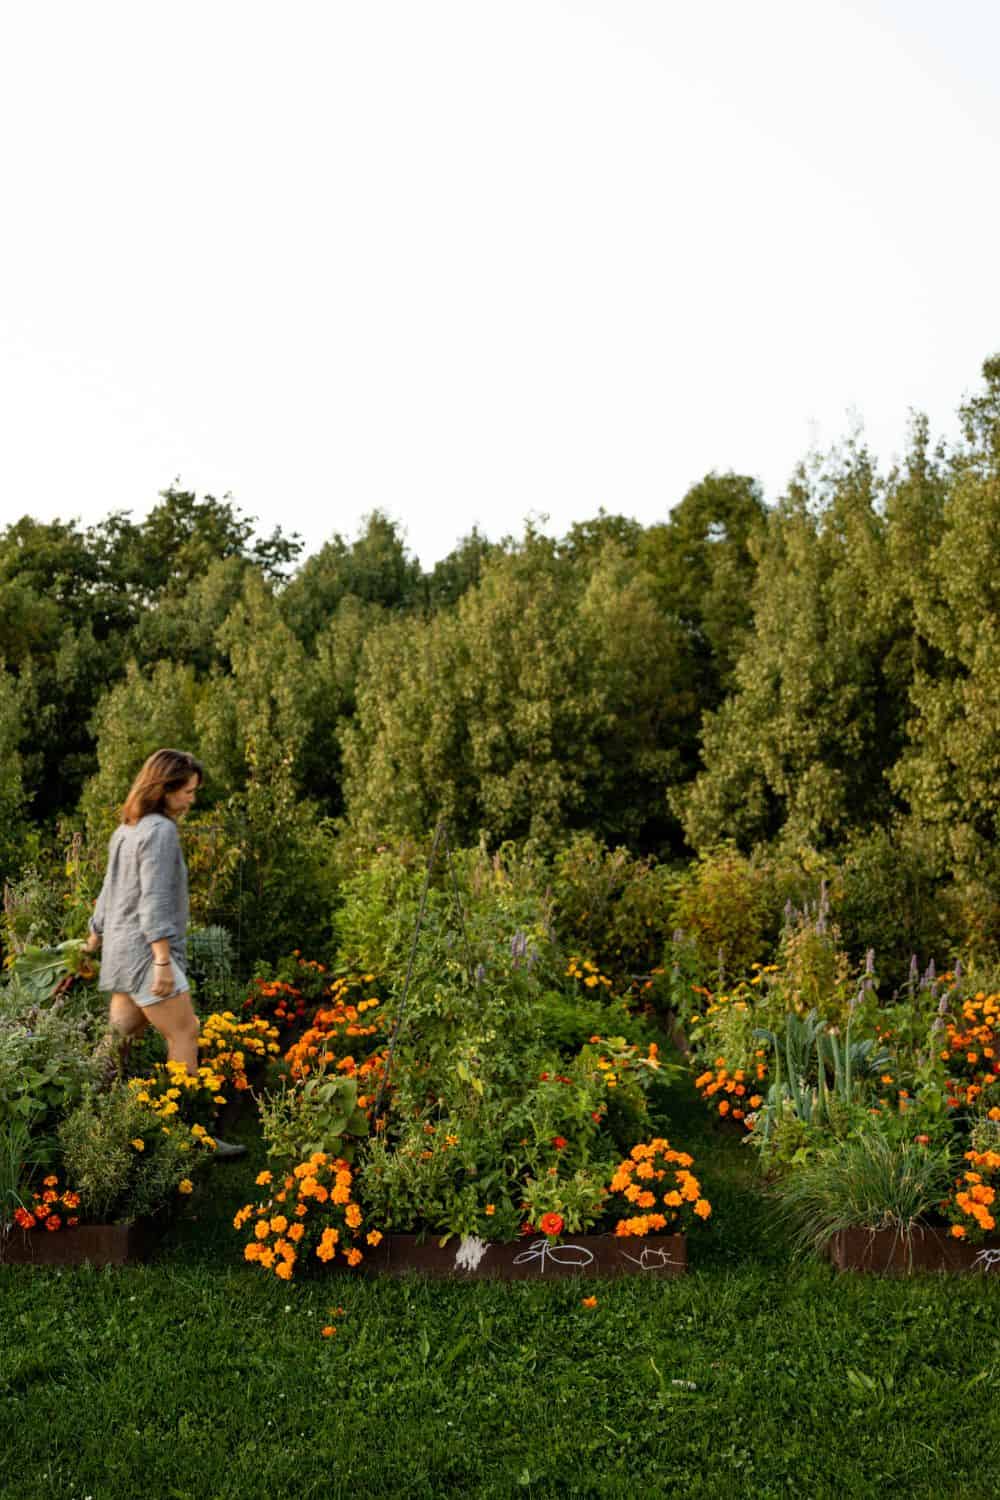 woman walking through raised bed garden with marigolds